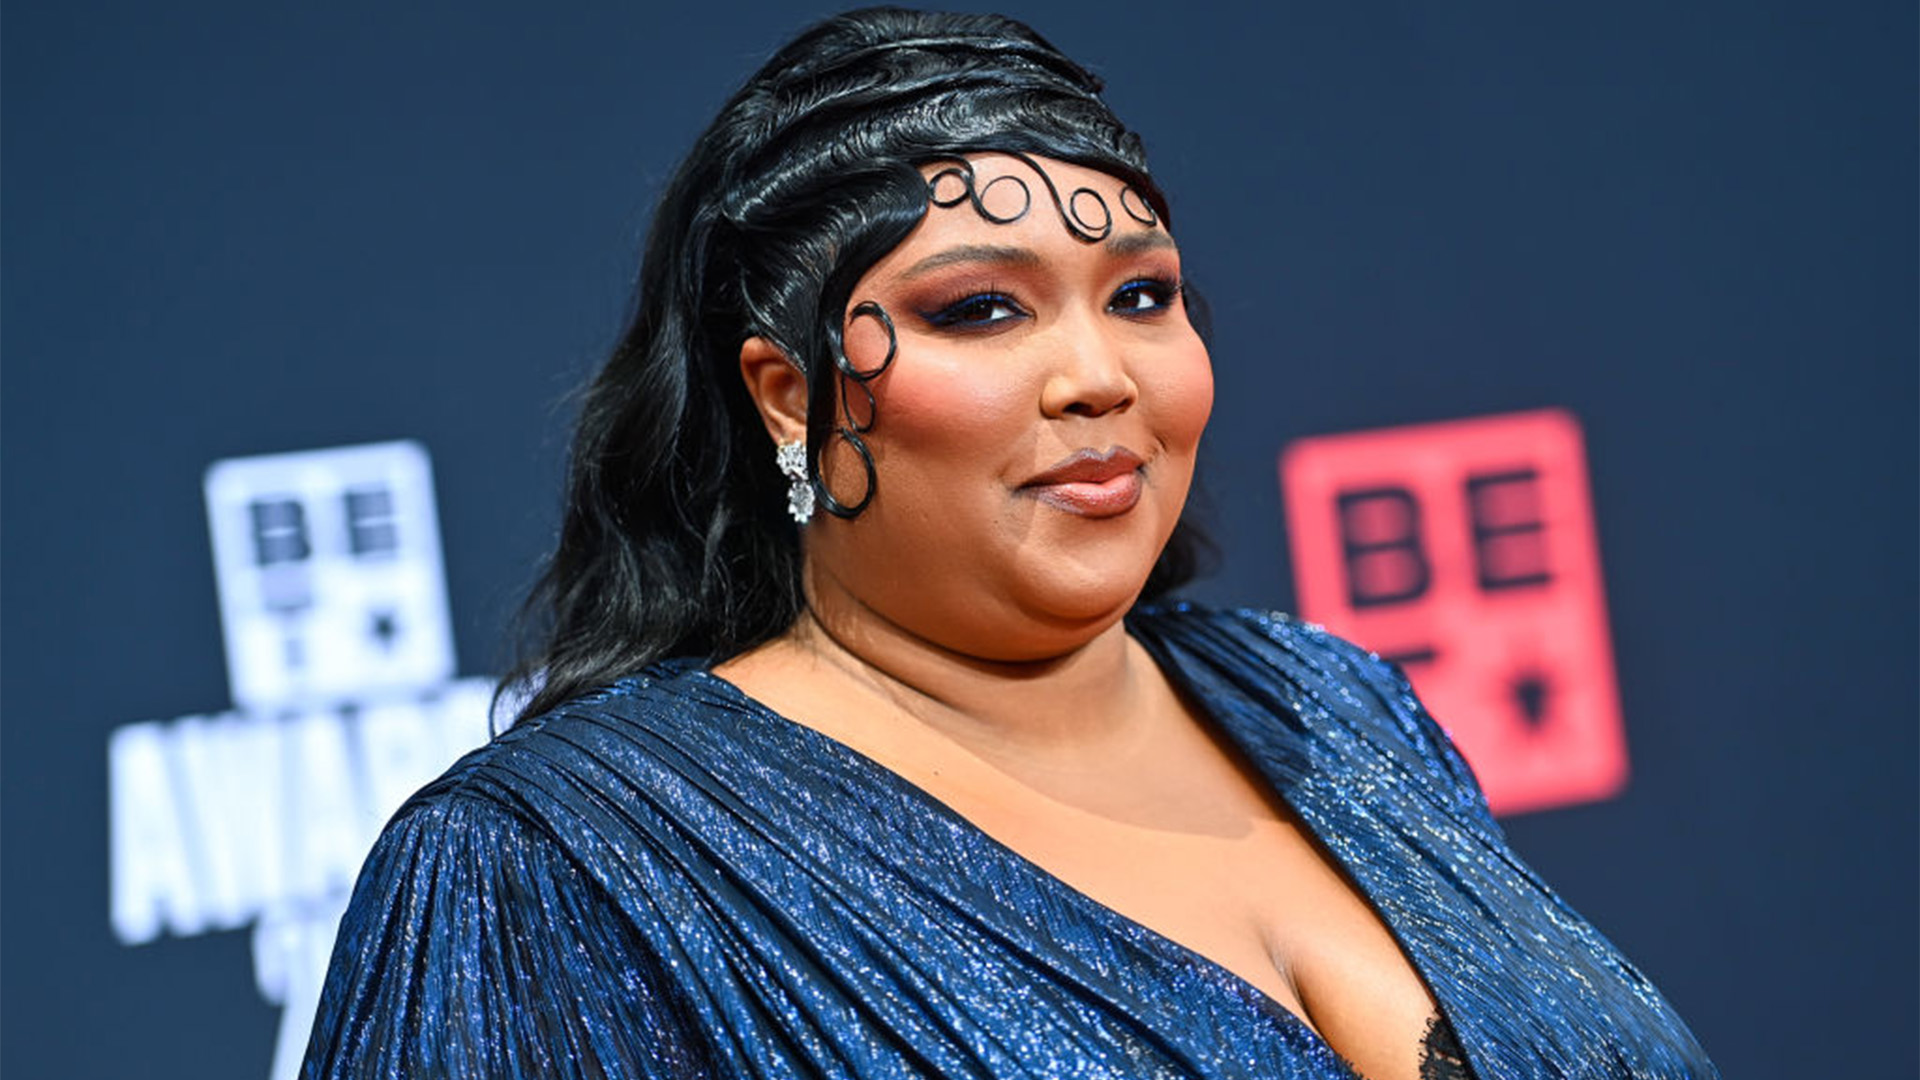 The Hitmaker: TikTok Crowns Lizzo As The No. 1 Most-Viewed Artist Of 2022 In The U.S.